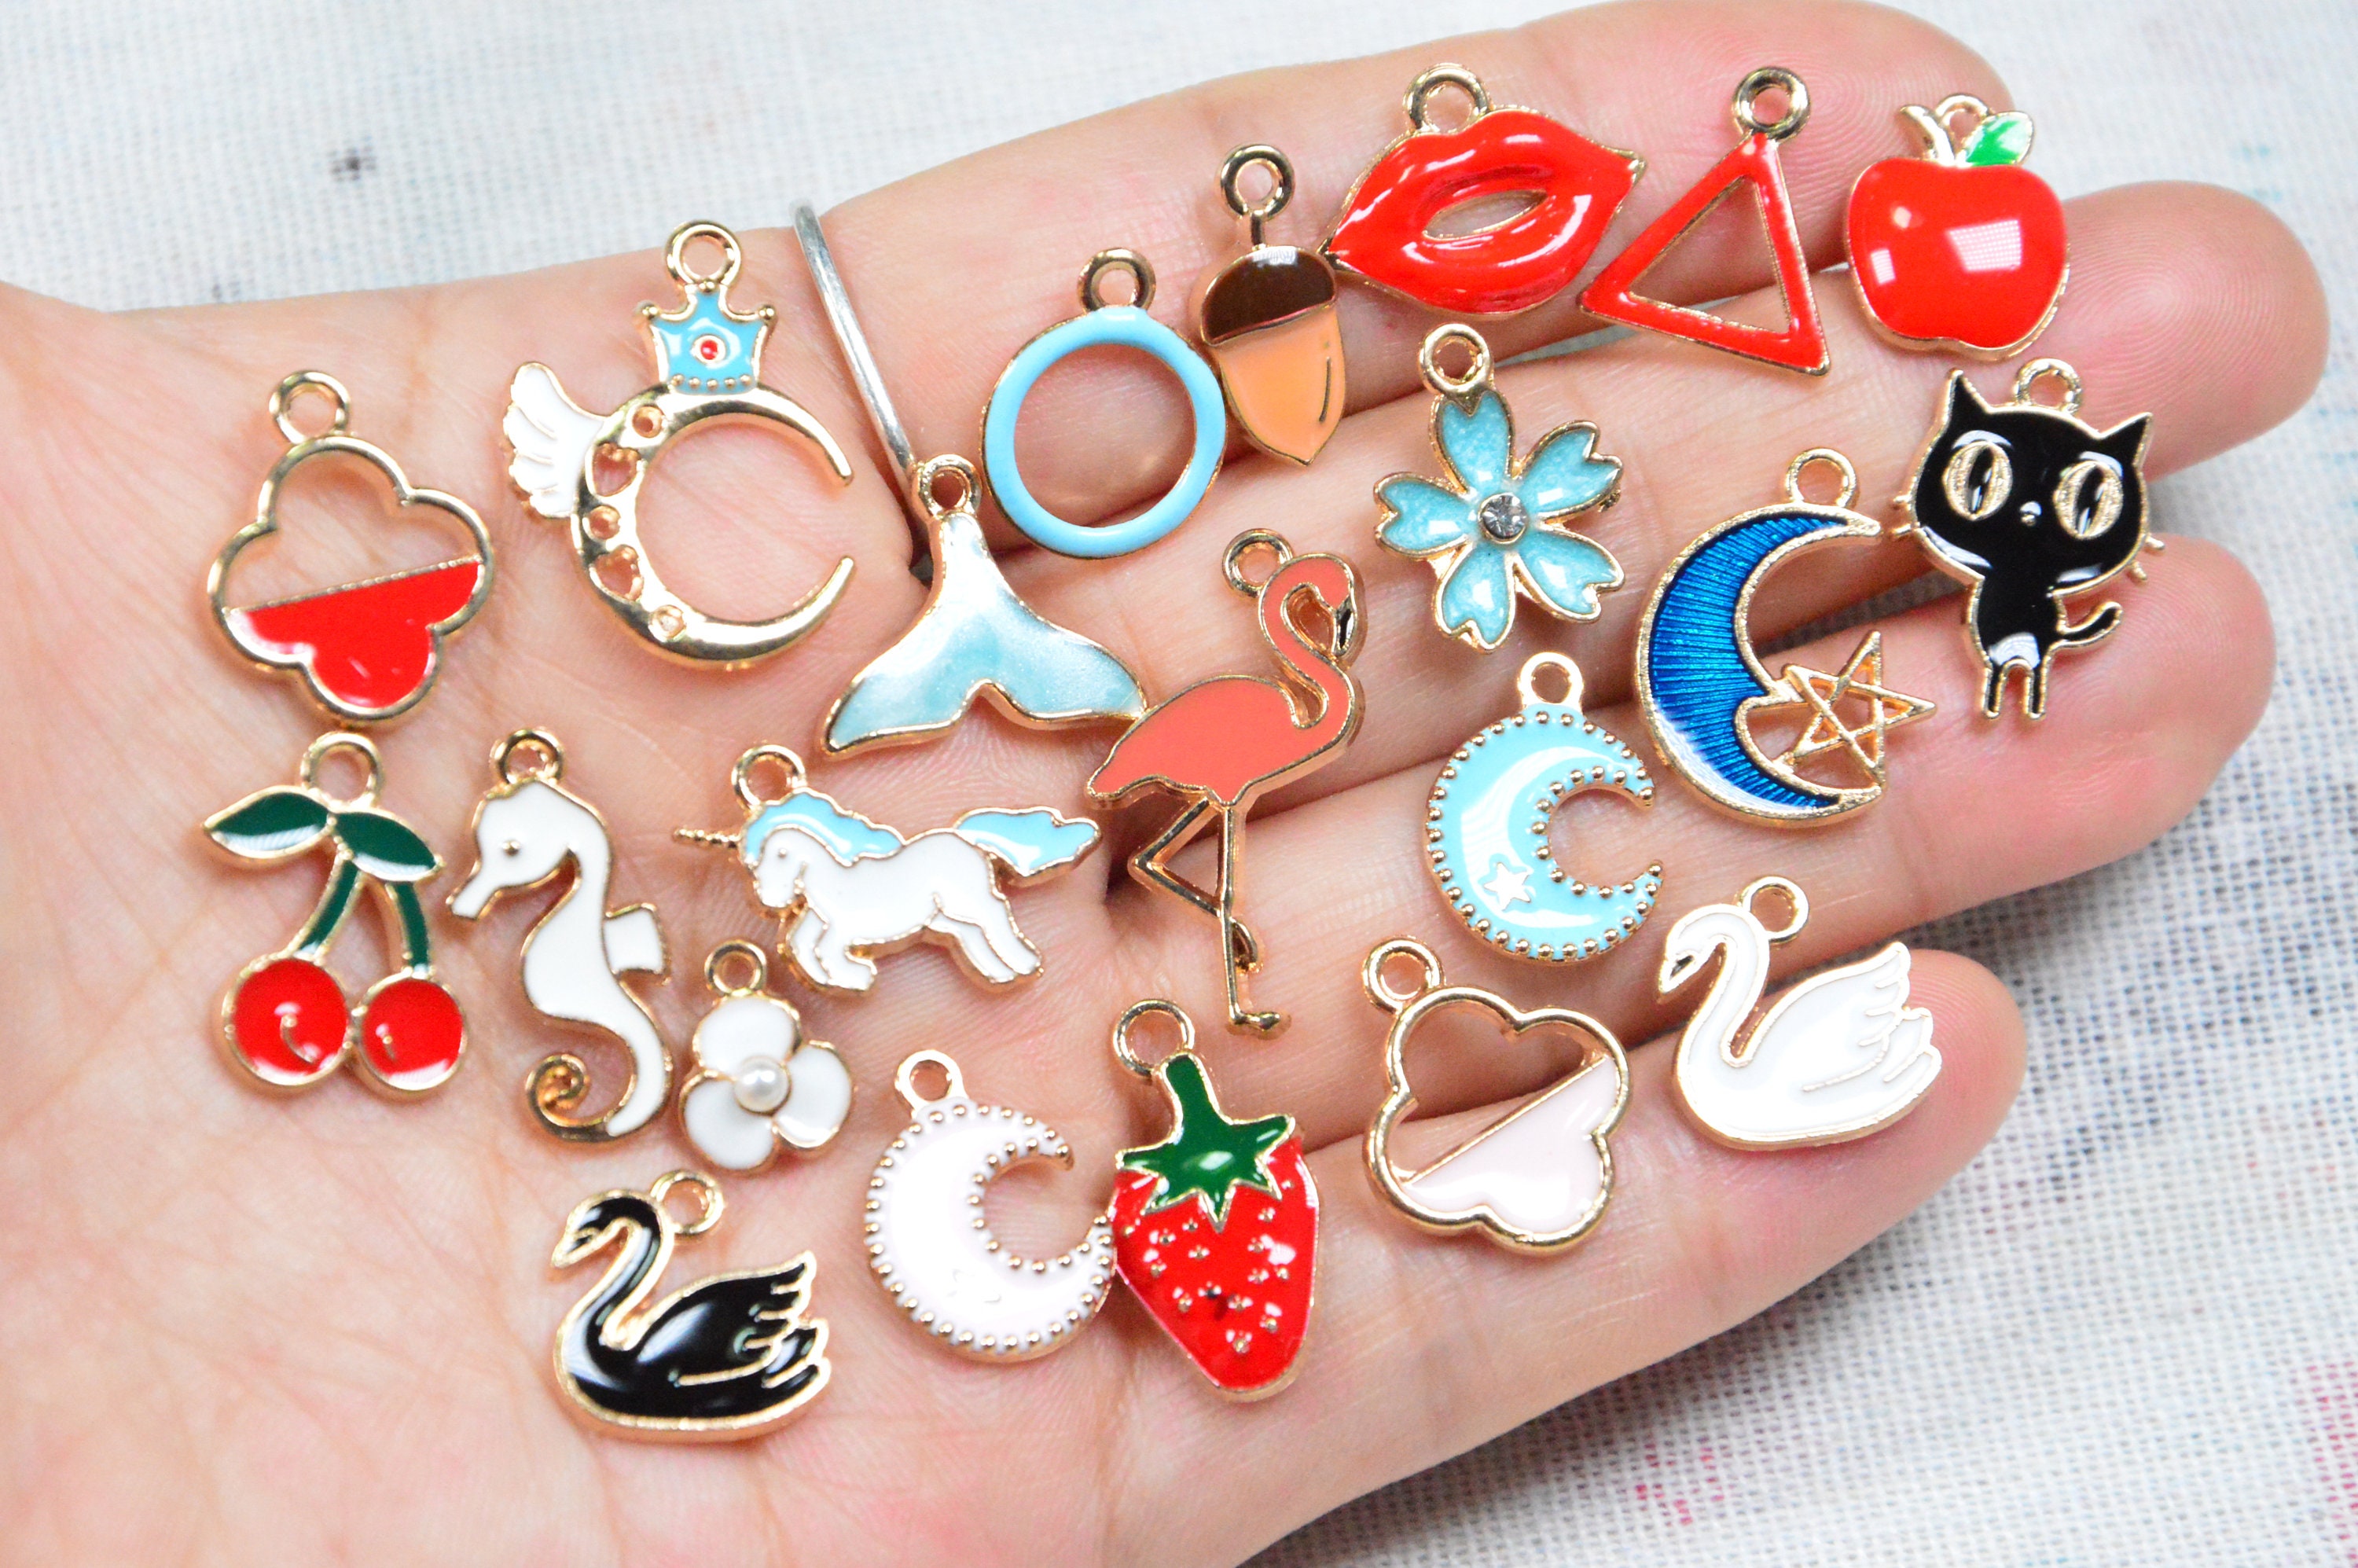 Bulk 100 Enamel Charms, Mixed Jewelry Charms, Gold Plated Metal Charm Pendant Collection, Assorted DIY Bracelet Charms